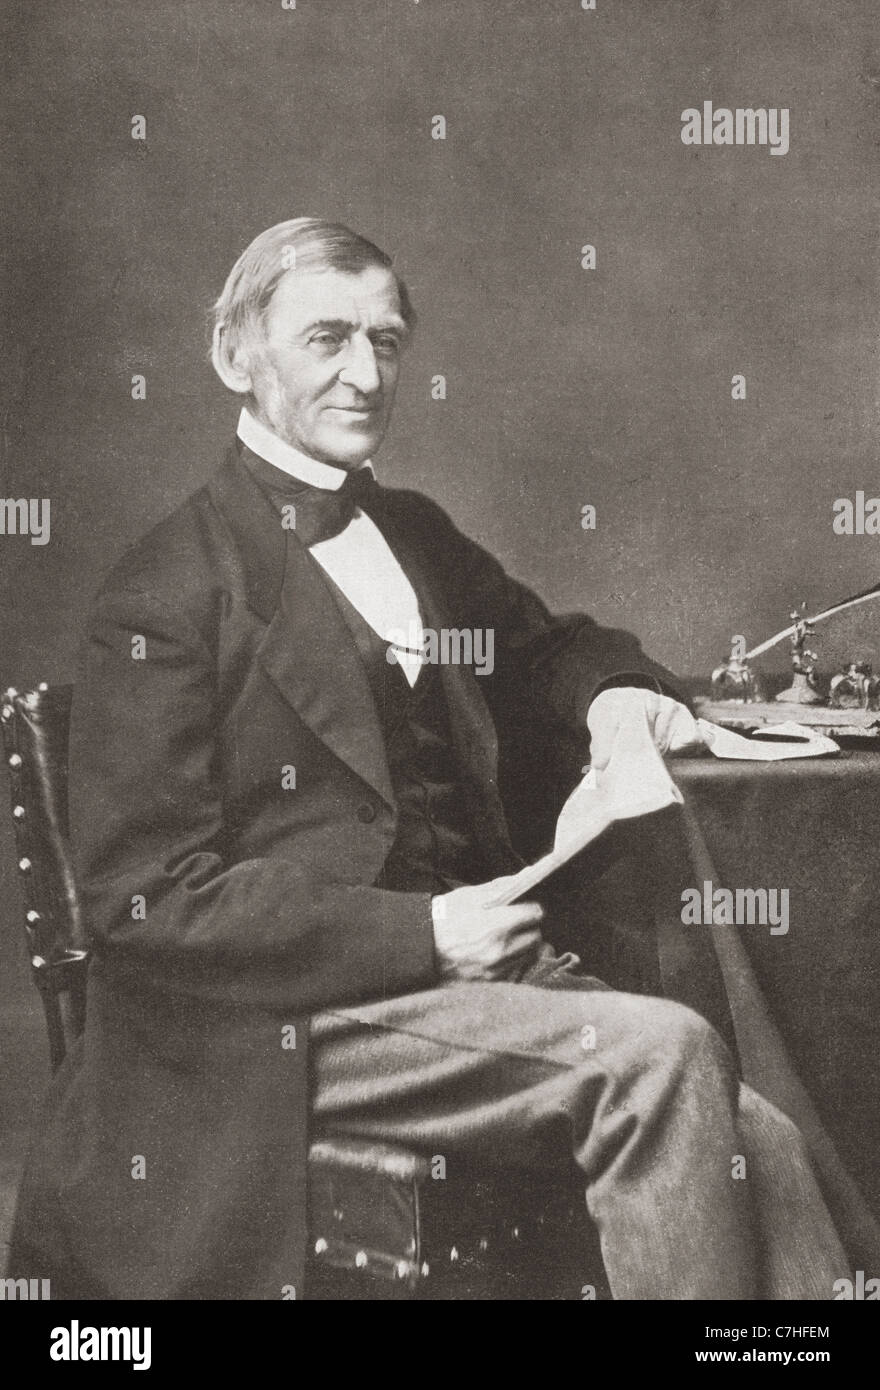 Ralph Waldo Emerson, 1803 –1882. American essayist, lecturer and poet. From Bibby's Annual published 1910. Stock Photo